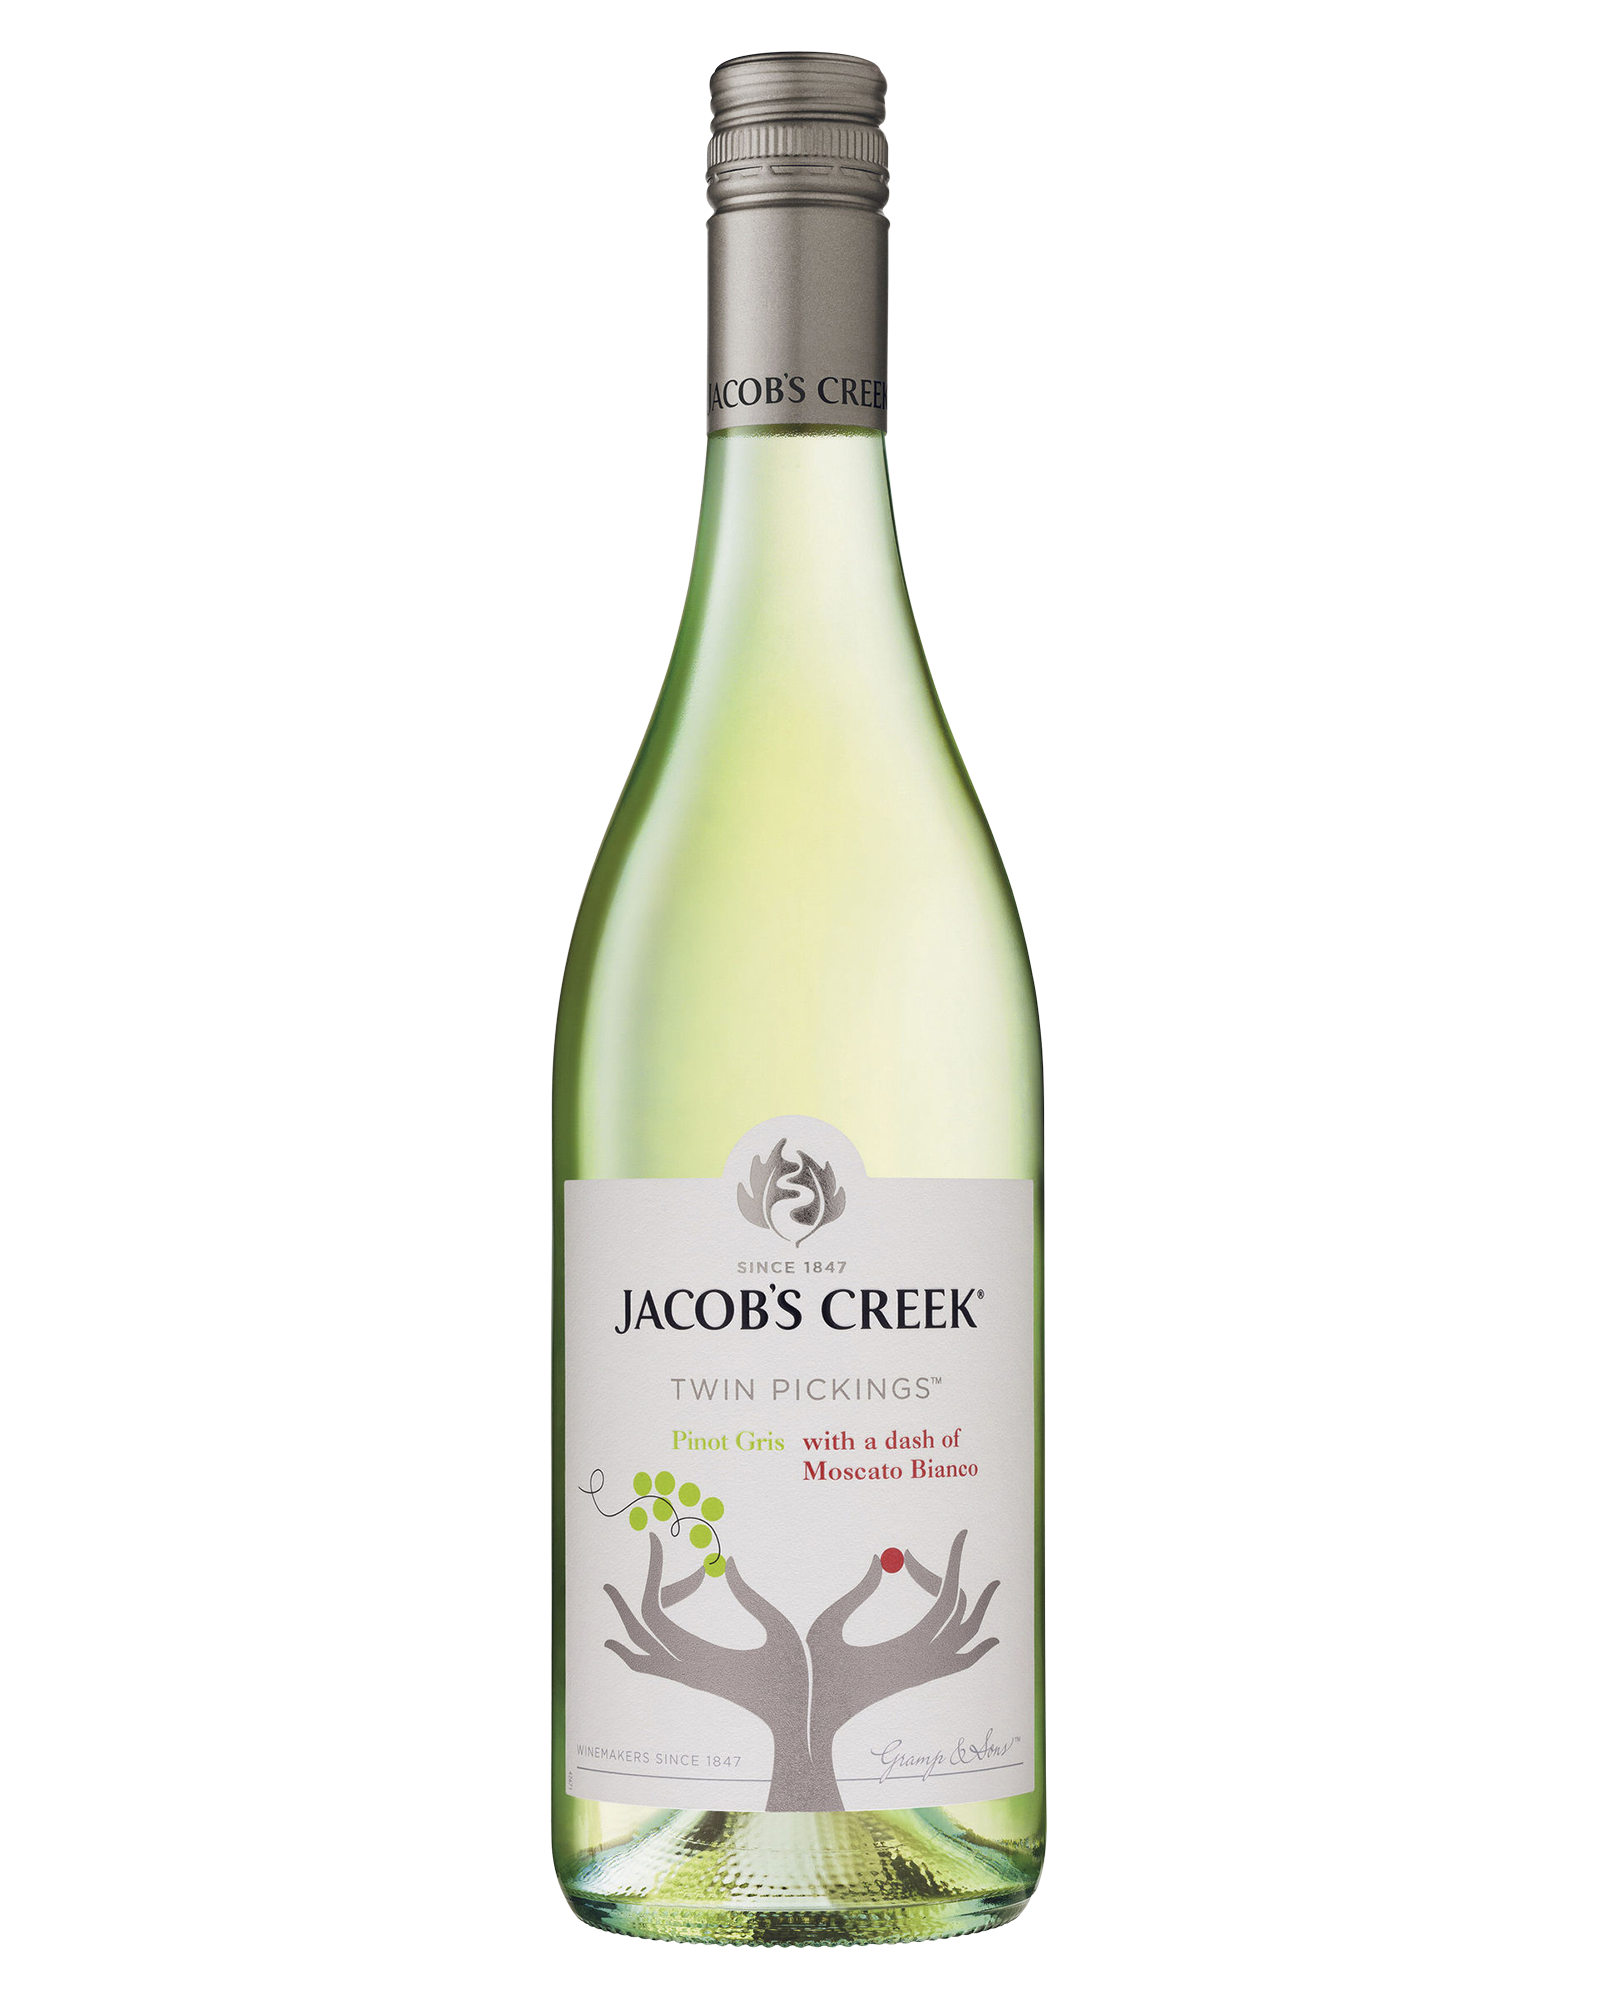 Jacob’s Creek Twin Pickings Pinot Gris Moscato